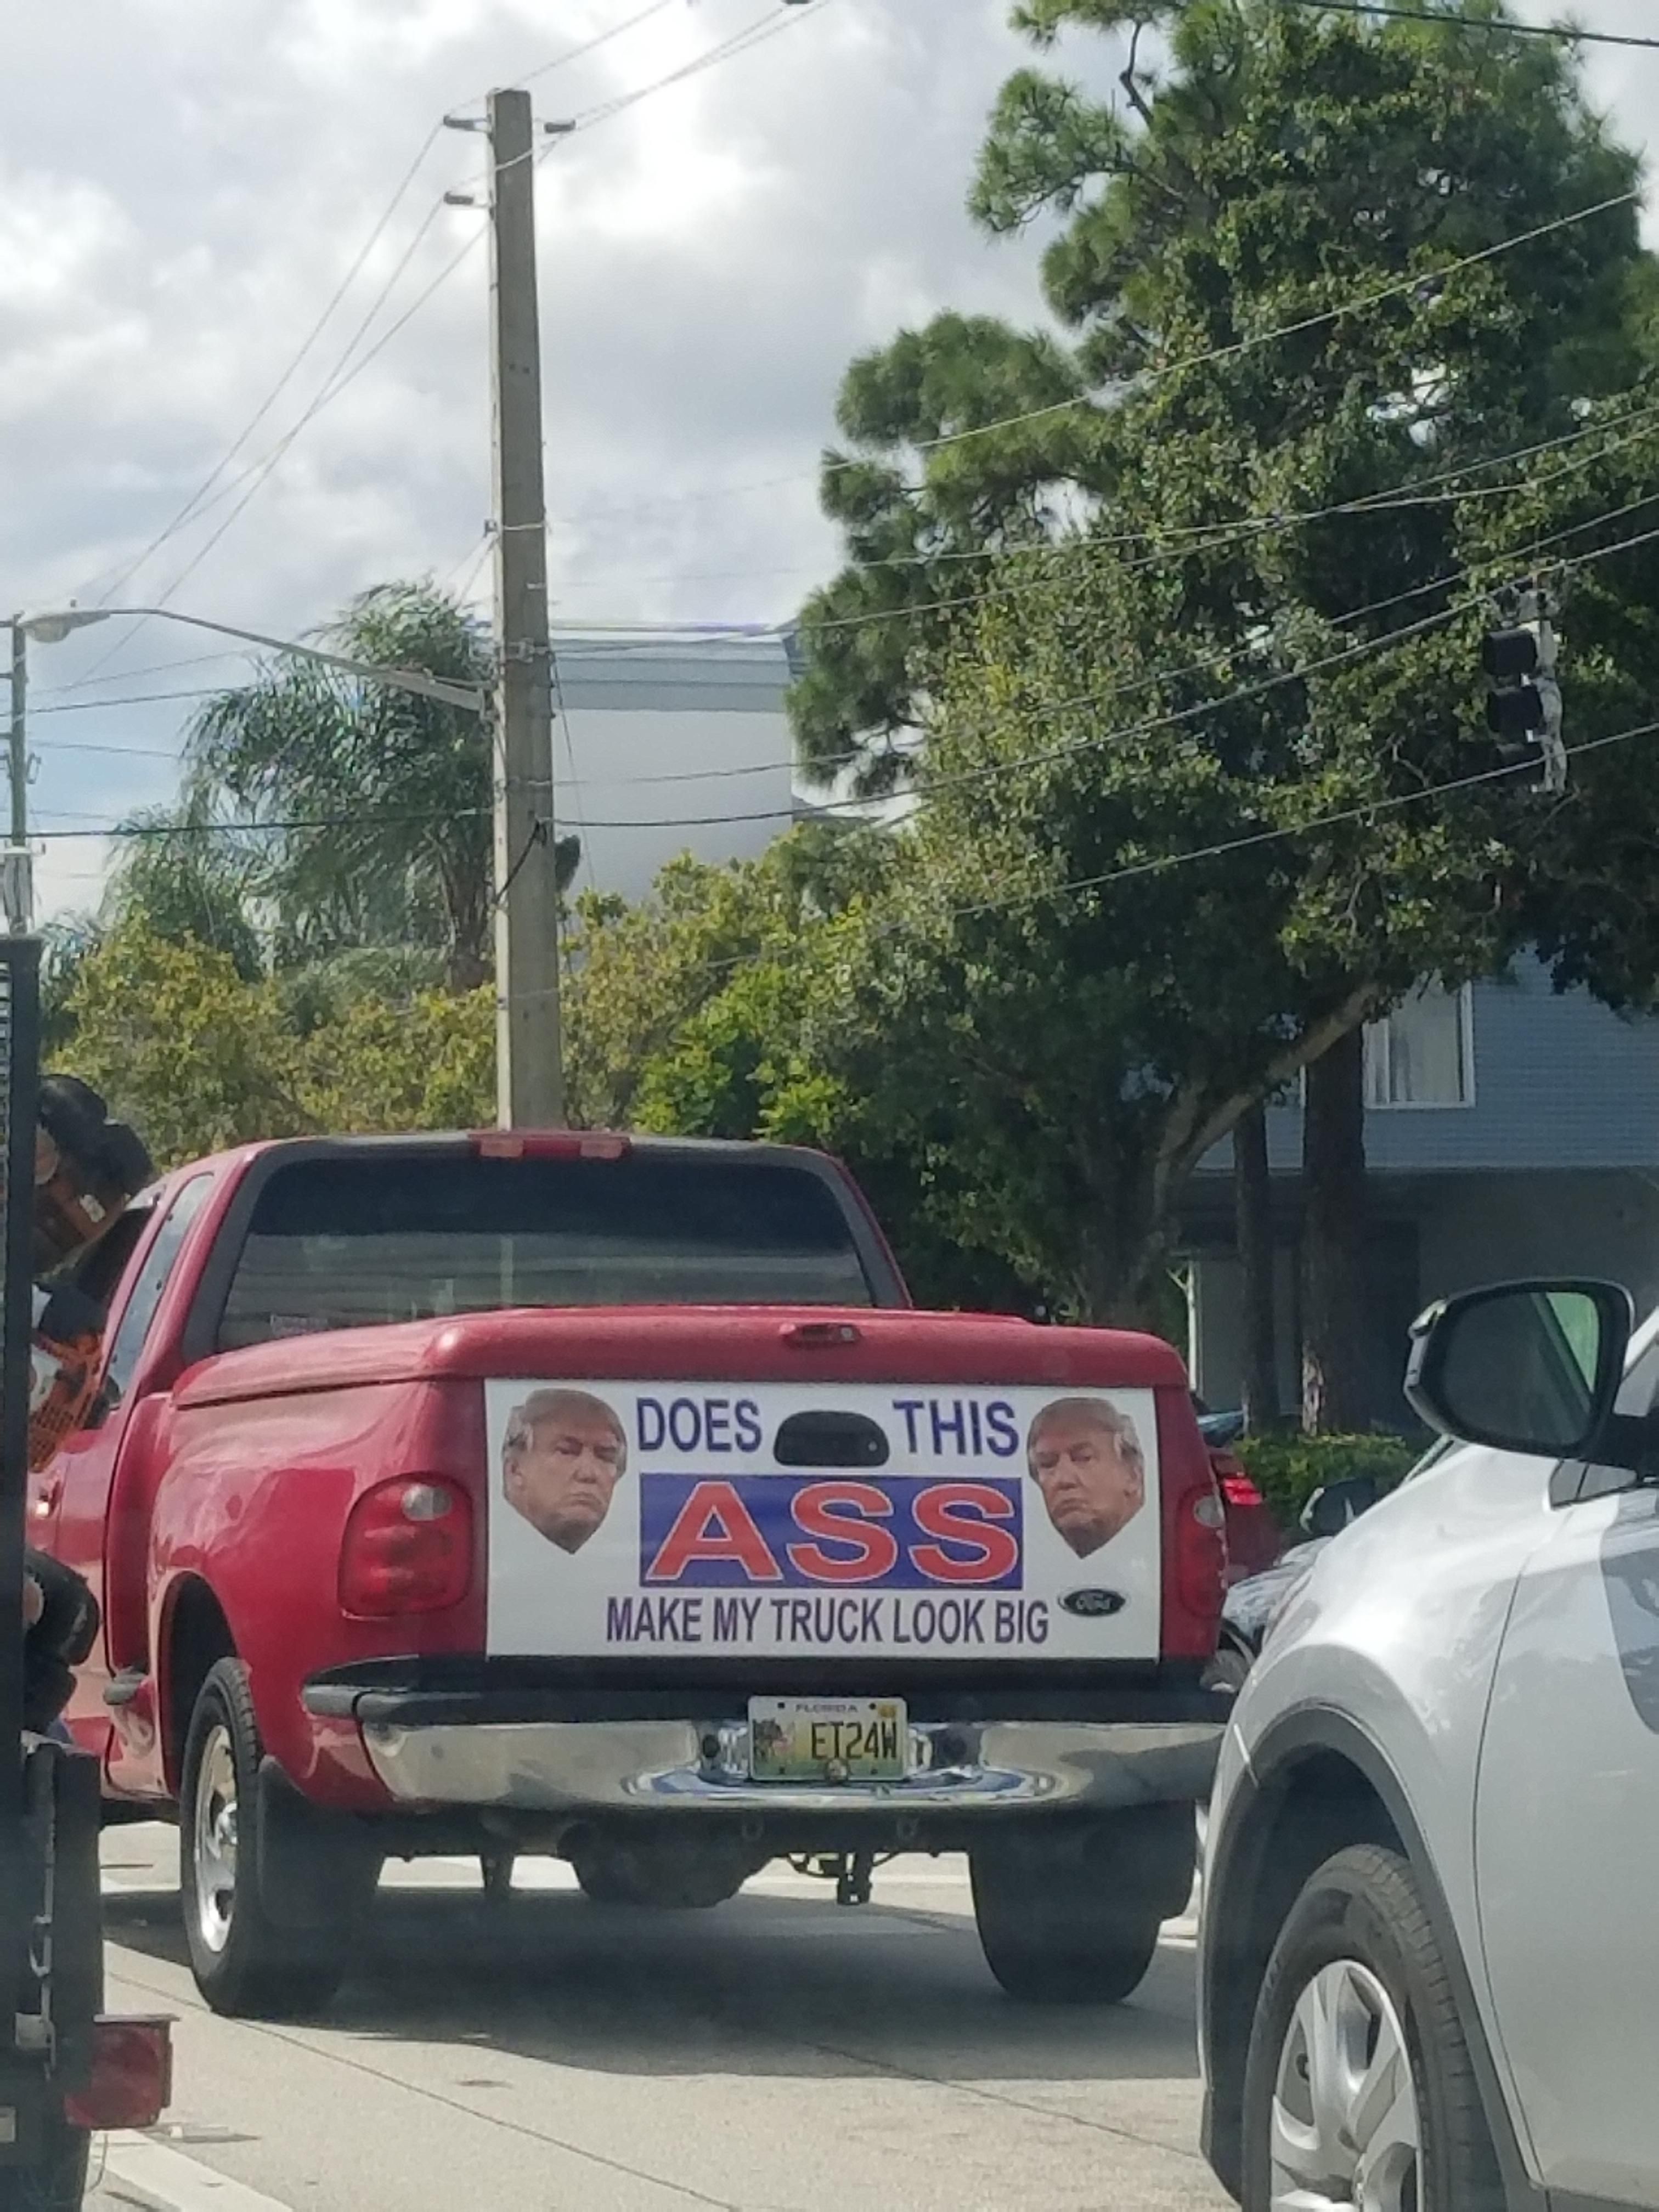 Saw this at a red light a while back